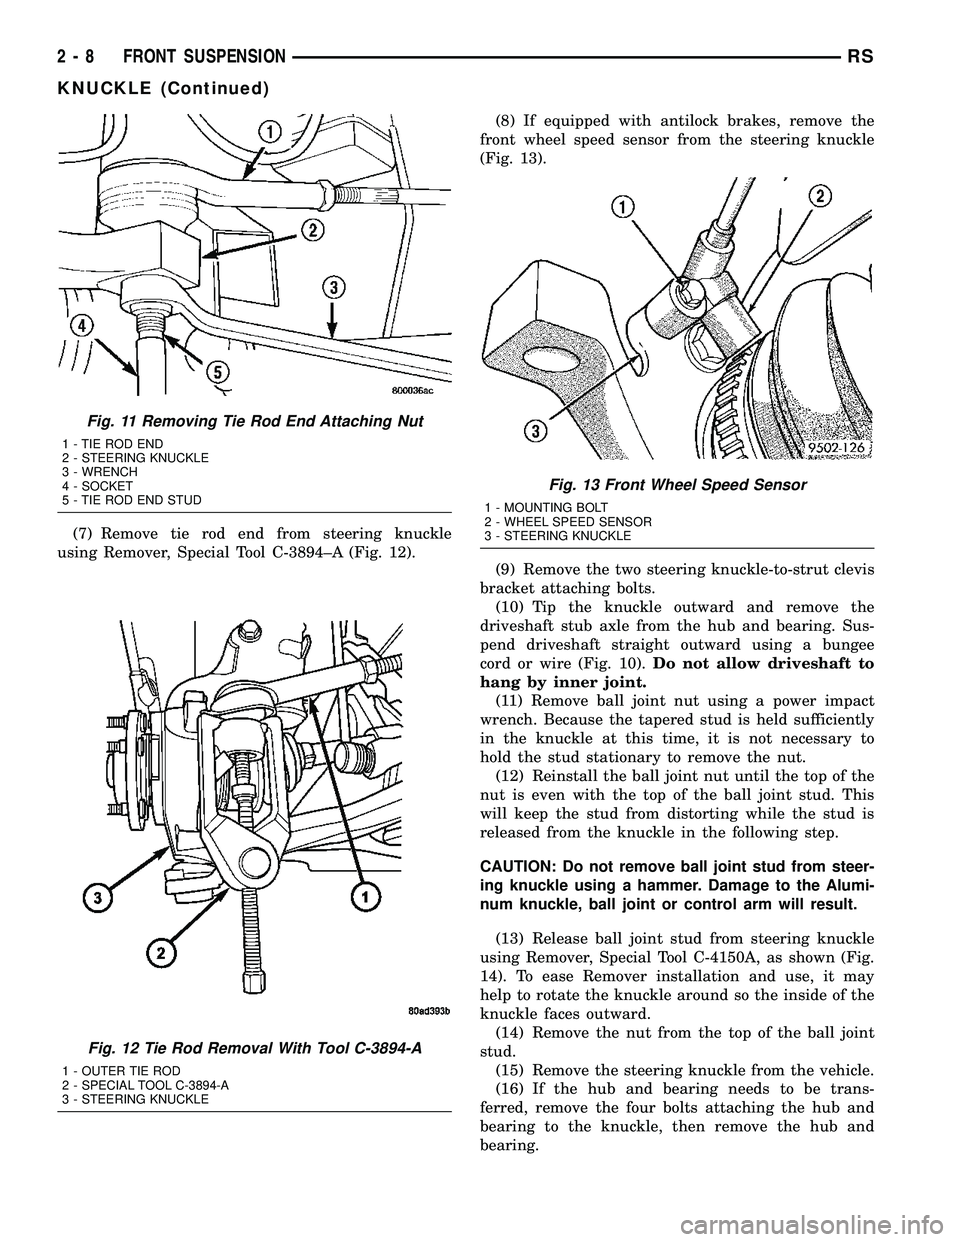 CHRYSLER VOYAGER 2005  Service Manual (7) Remove tie rod end from steering knuckle
using Remover, Special Tool C-3894±A (Fig. 12).(8) If equipped with antilock brakes, remove the
front wheel speed sensor from the steering knuckle
(Fig. 1